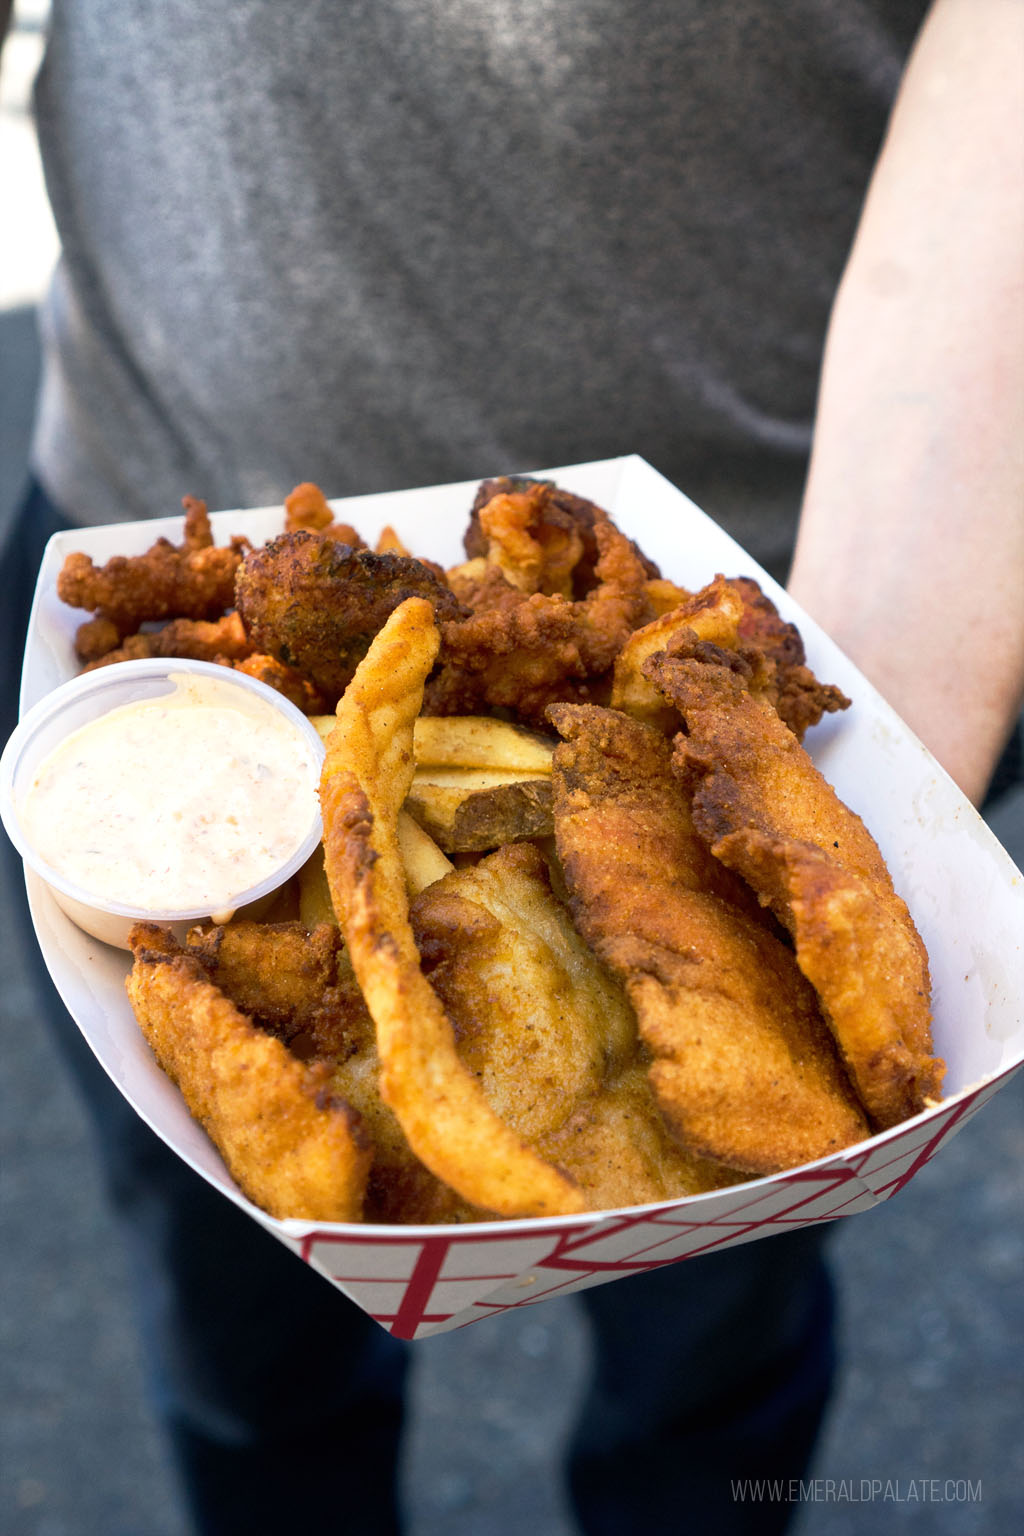 person holding a takeout container of fried seafood with tartare sauce from one of the Black-owned Seattle restaurants